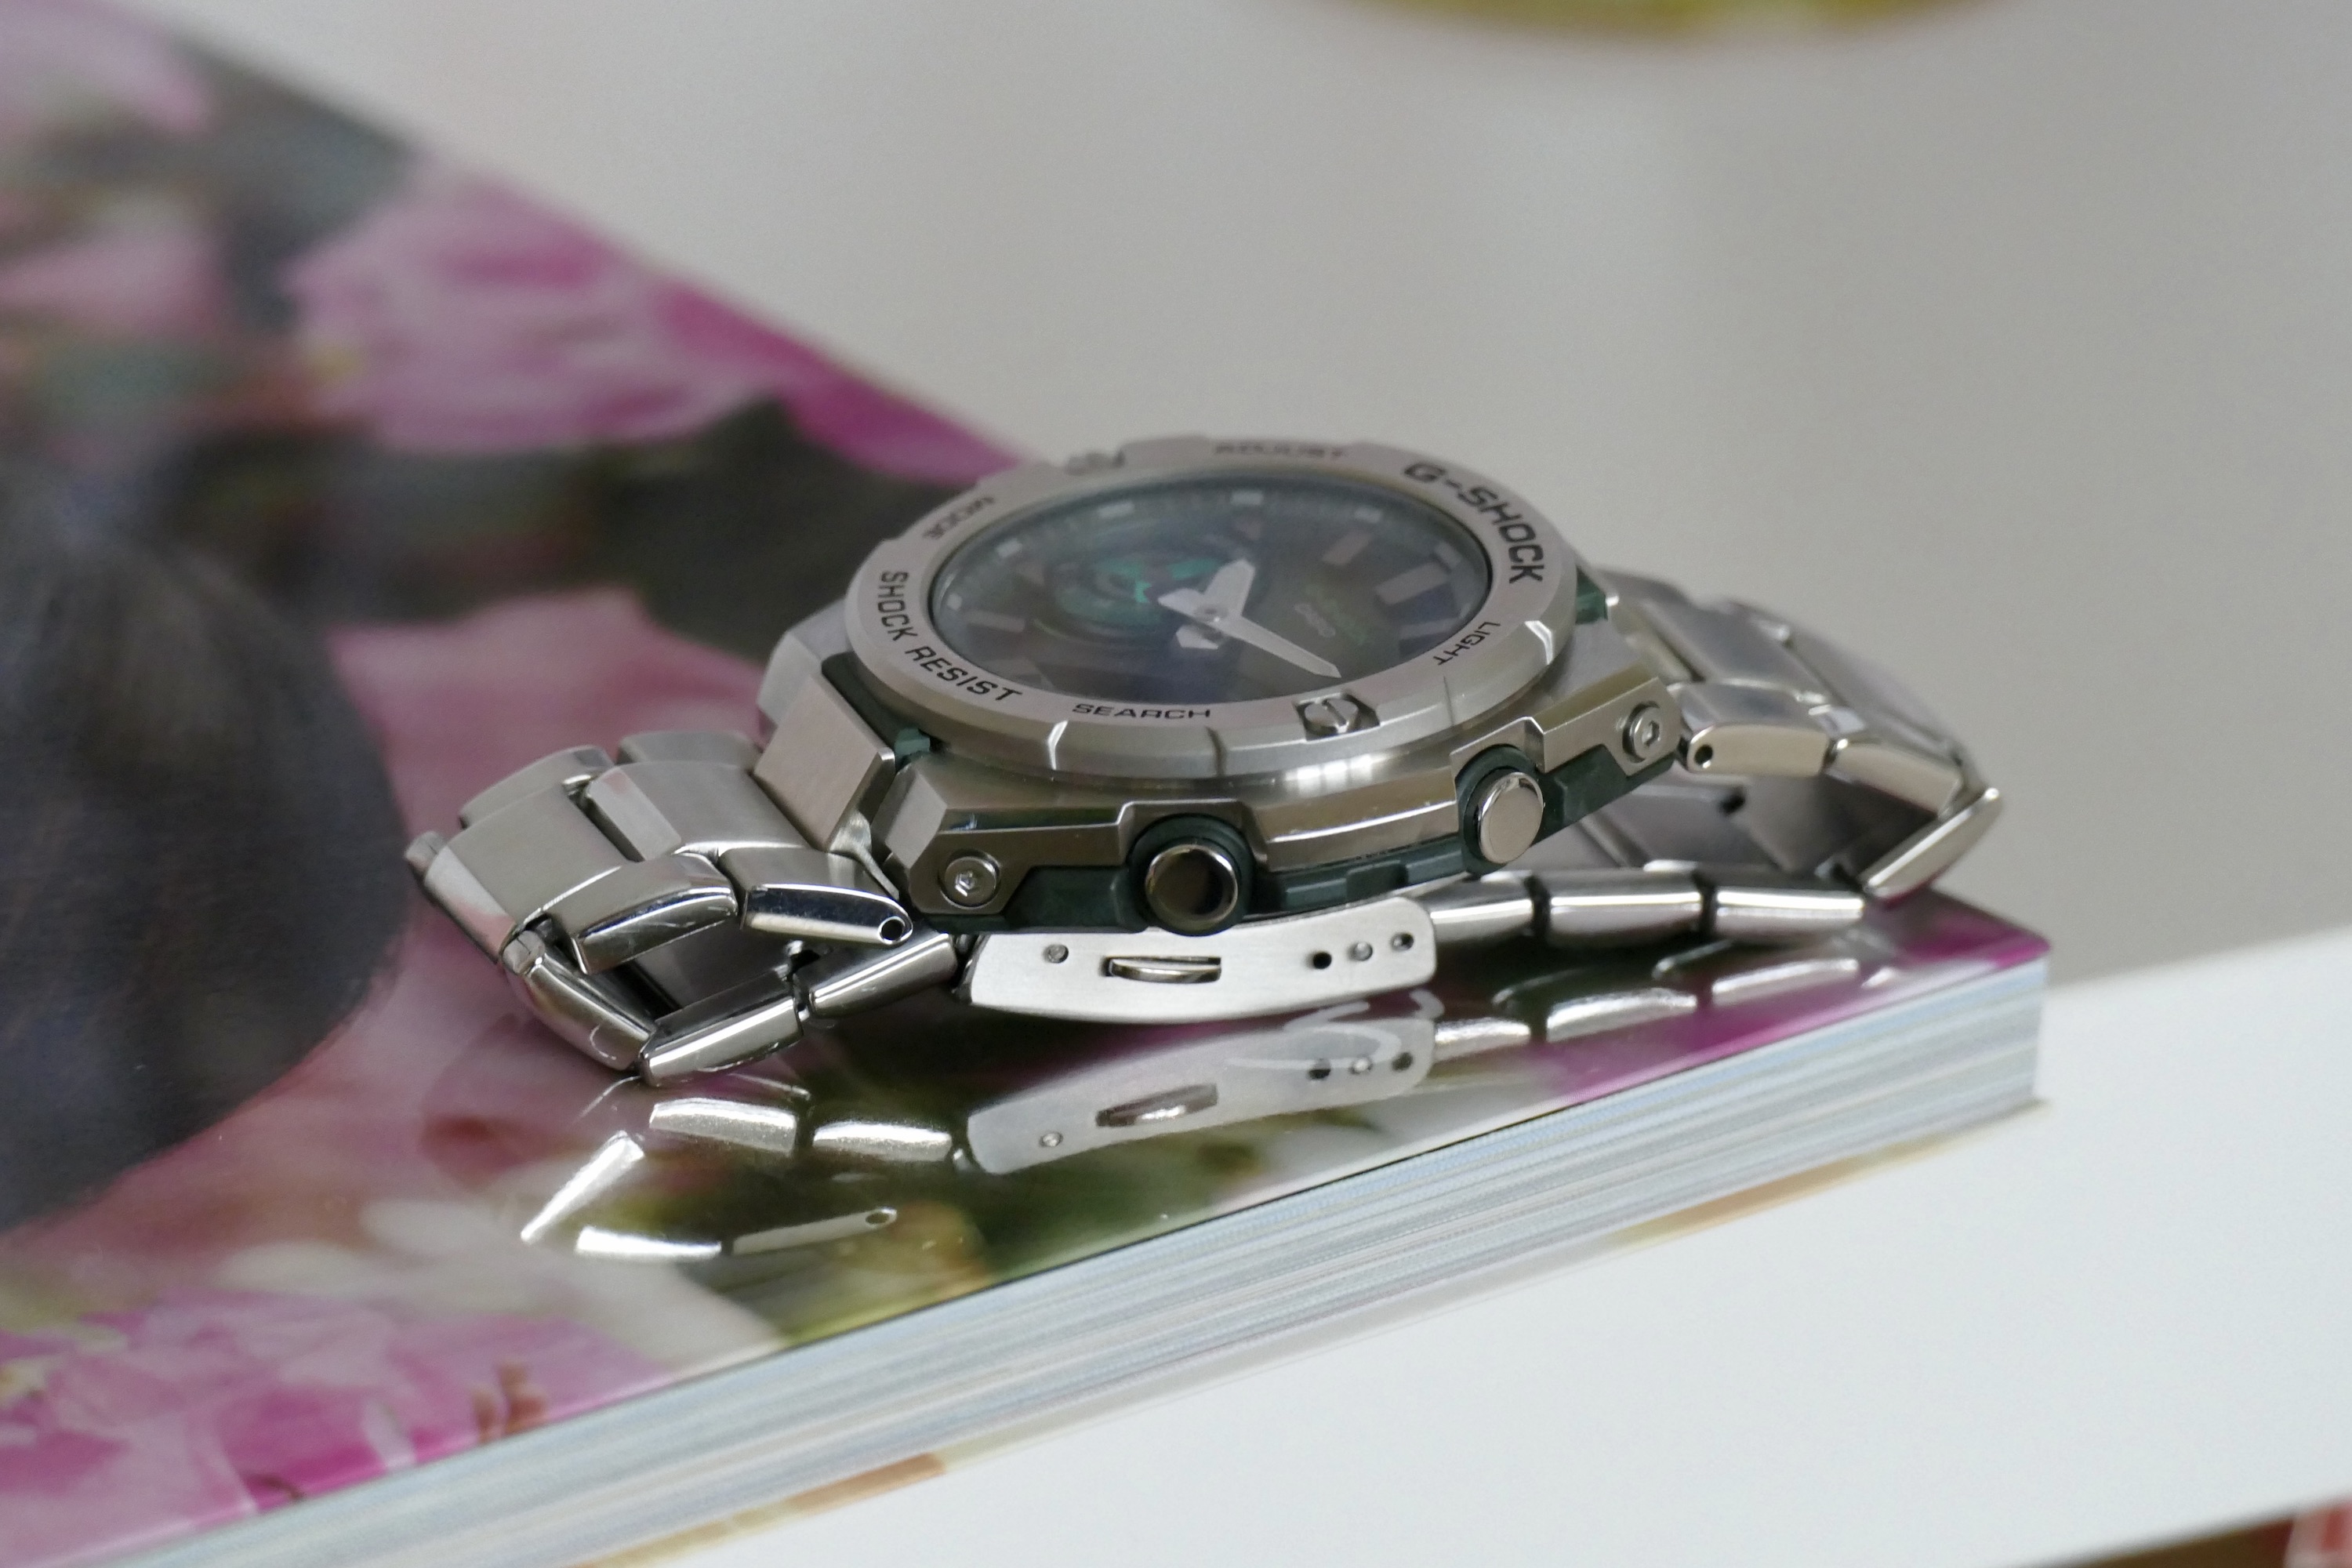 Casio G-Shock GST-B500 seen from the side.